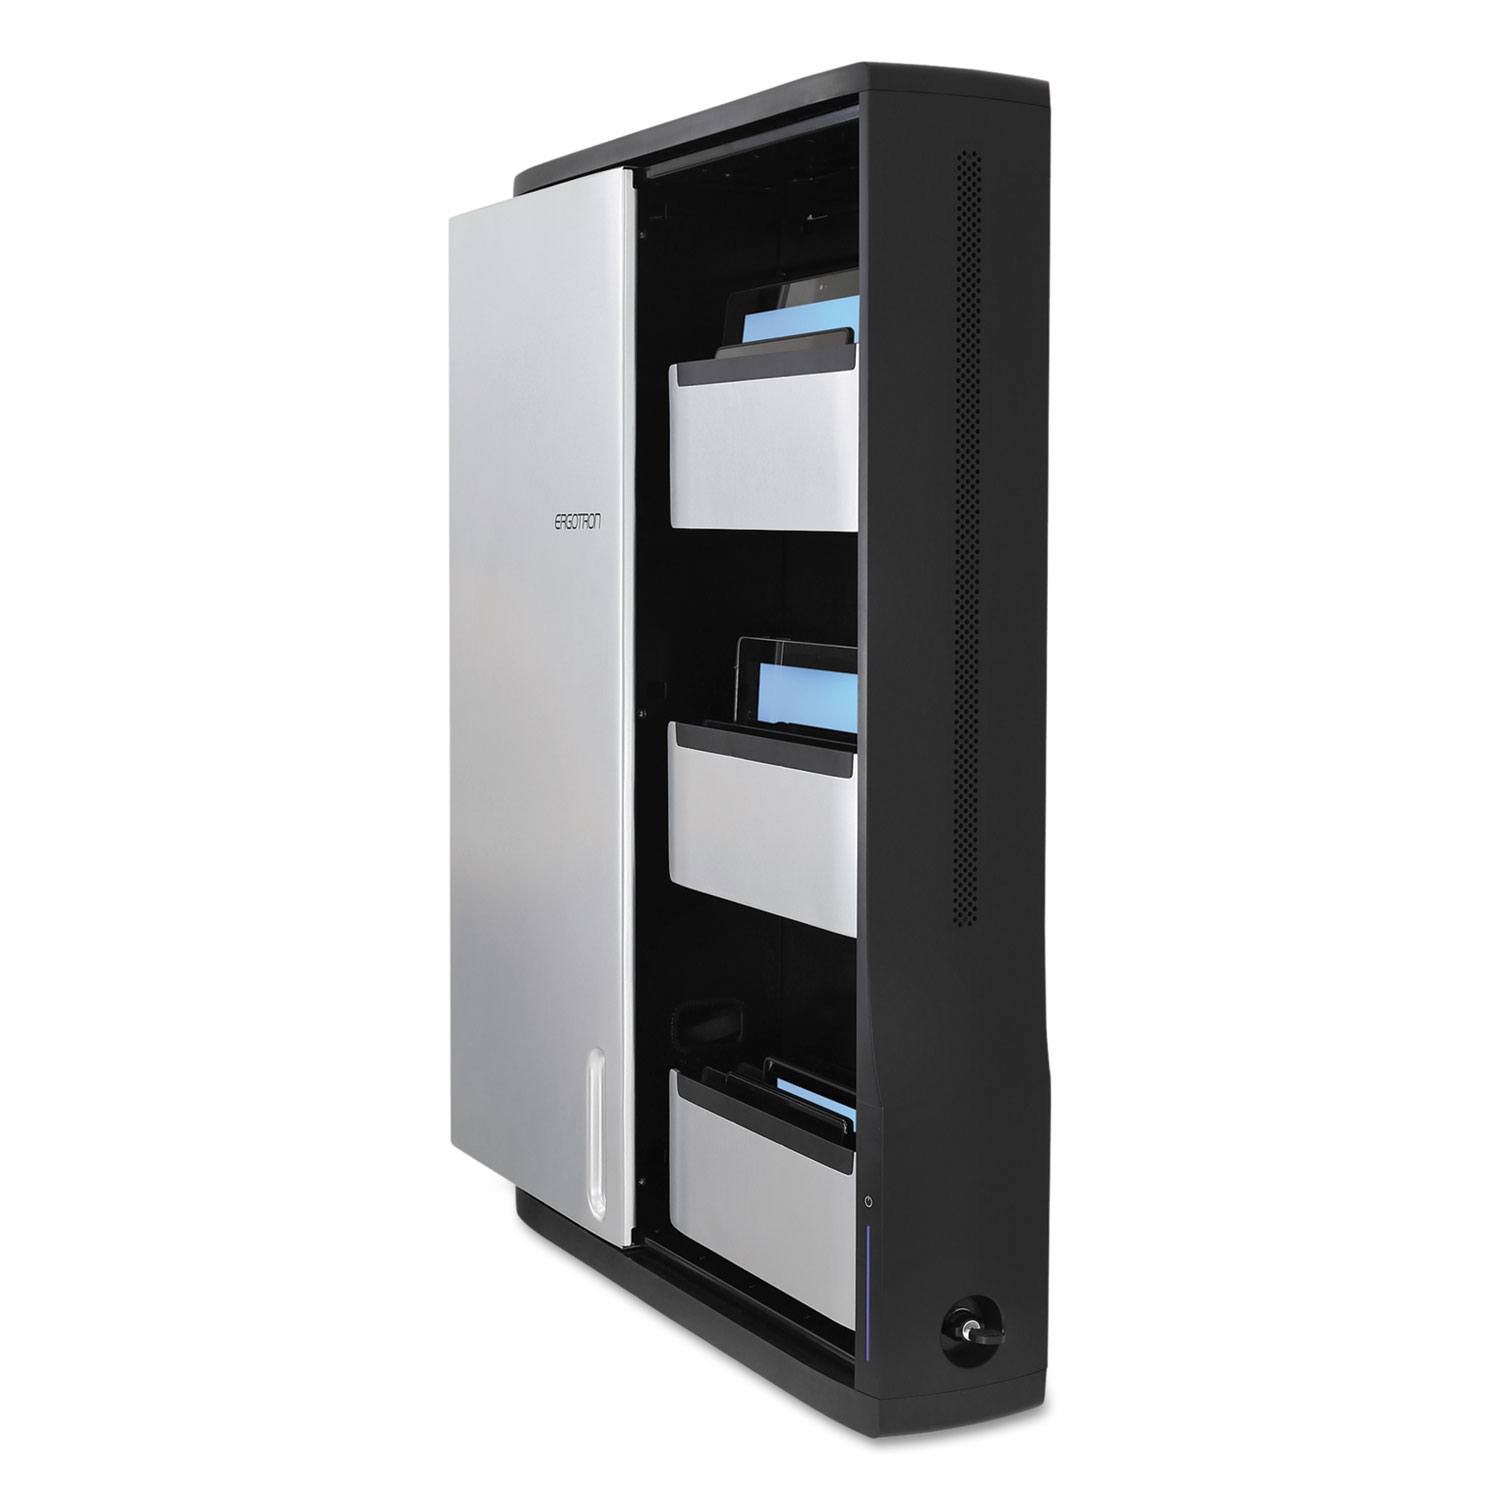  Ergotron DM12-1006-1 Zip12 Charging Wall Cabinet for 12 Devices, 26.4 x 5.9 x 35.6, Black/Silver (ERGDM1210061) 